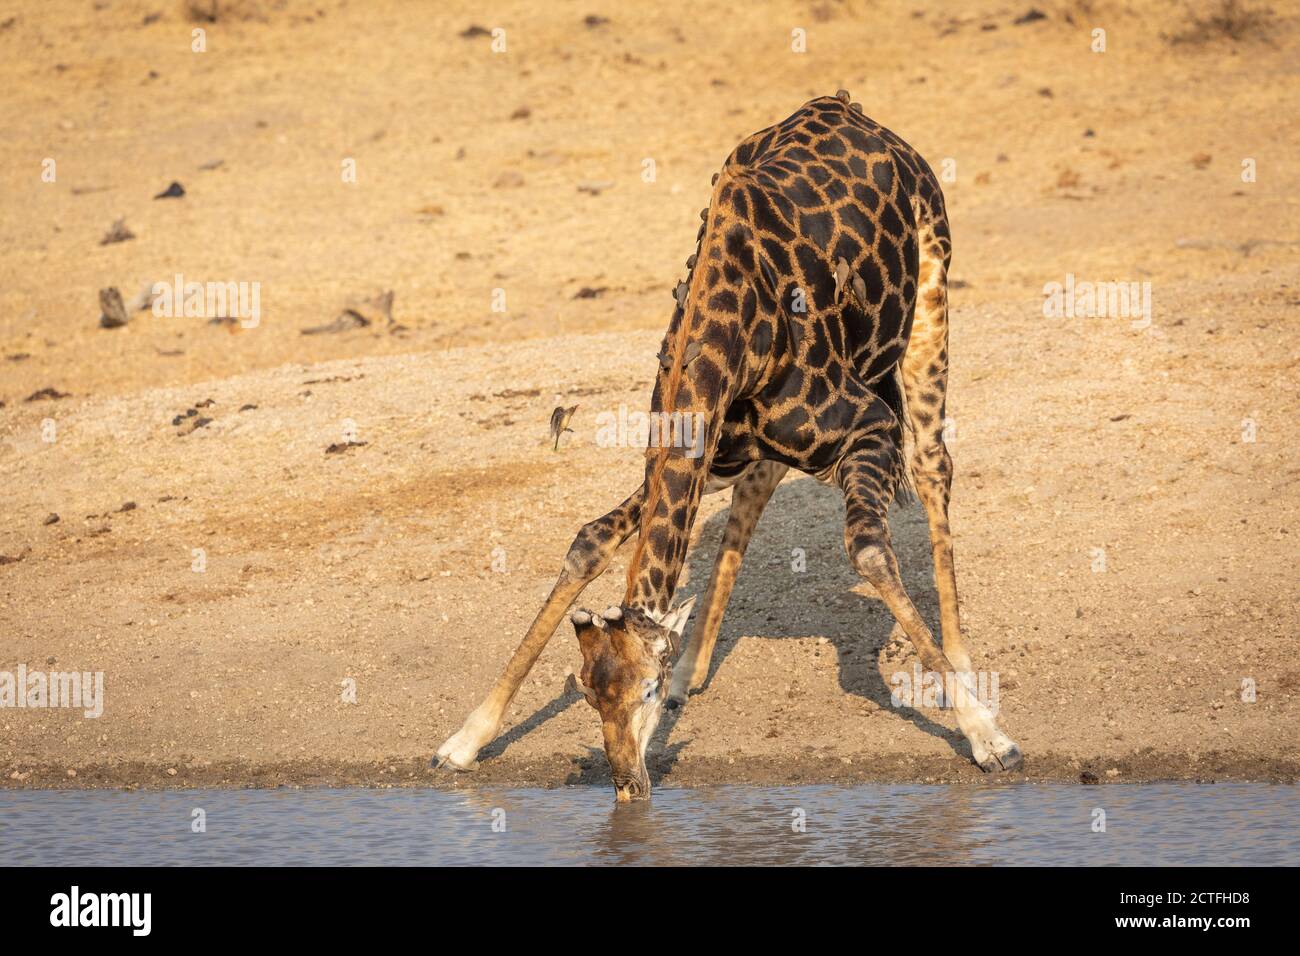 Horizontal portrait of an adult male giraffe standing at the edge of river drinking water in Kruger Park in South Africa Stock Photo